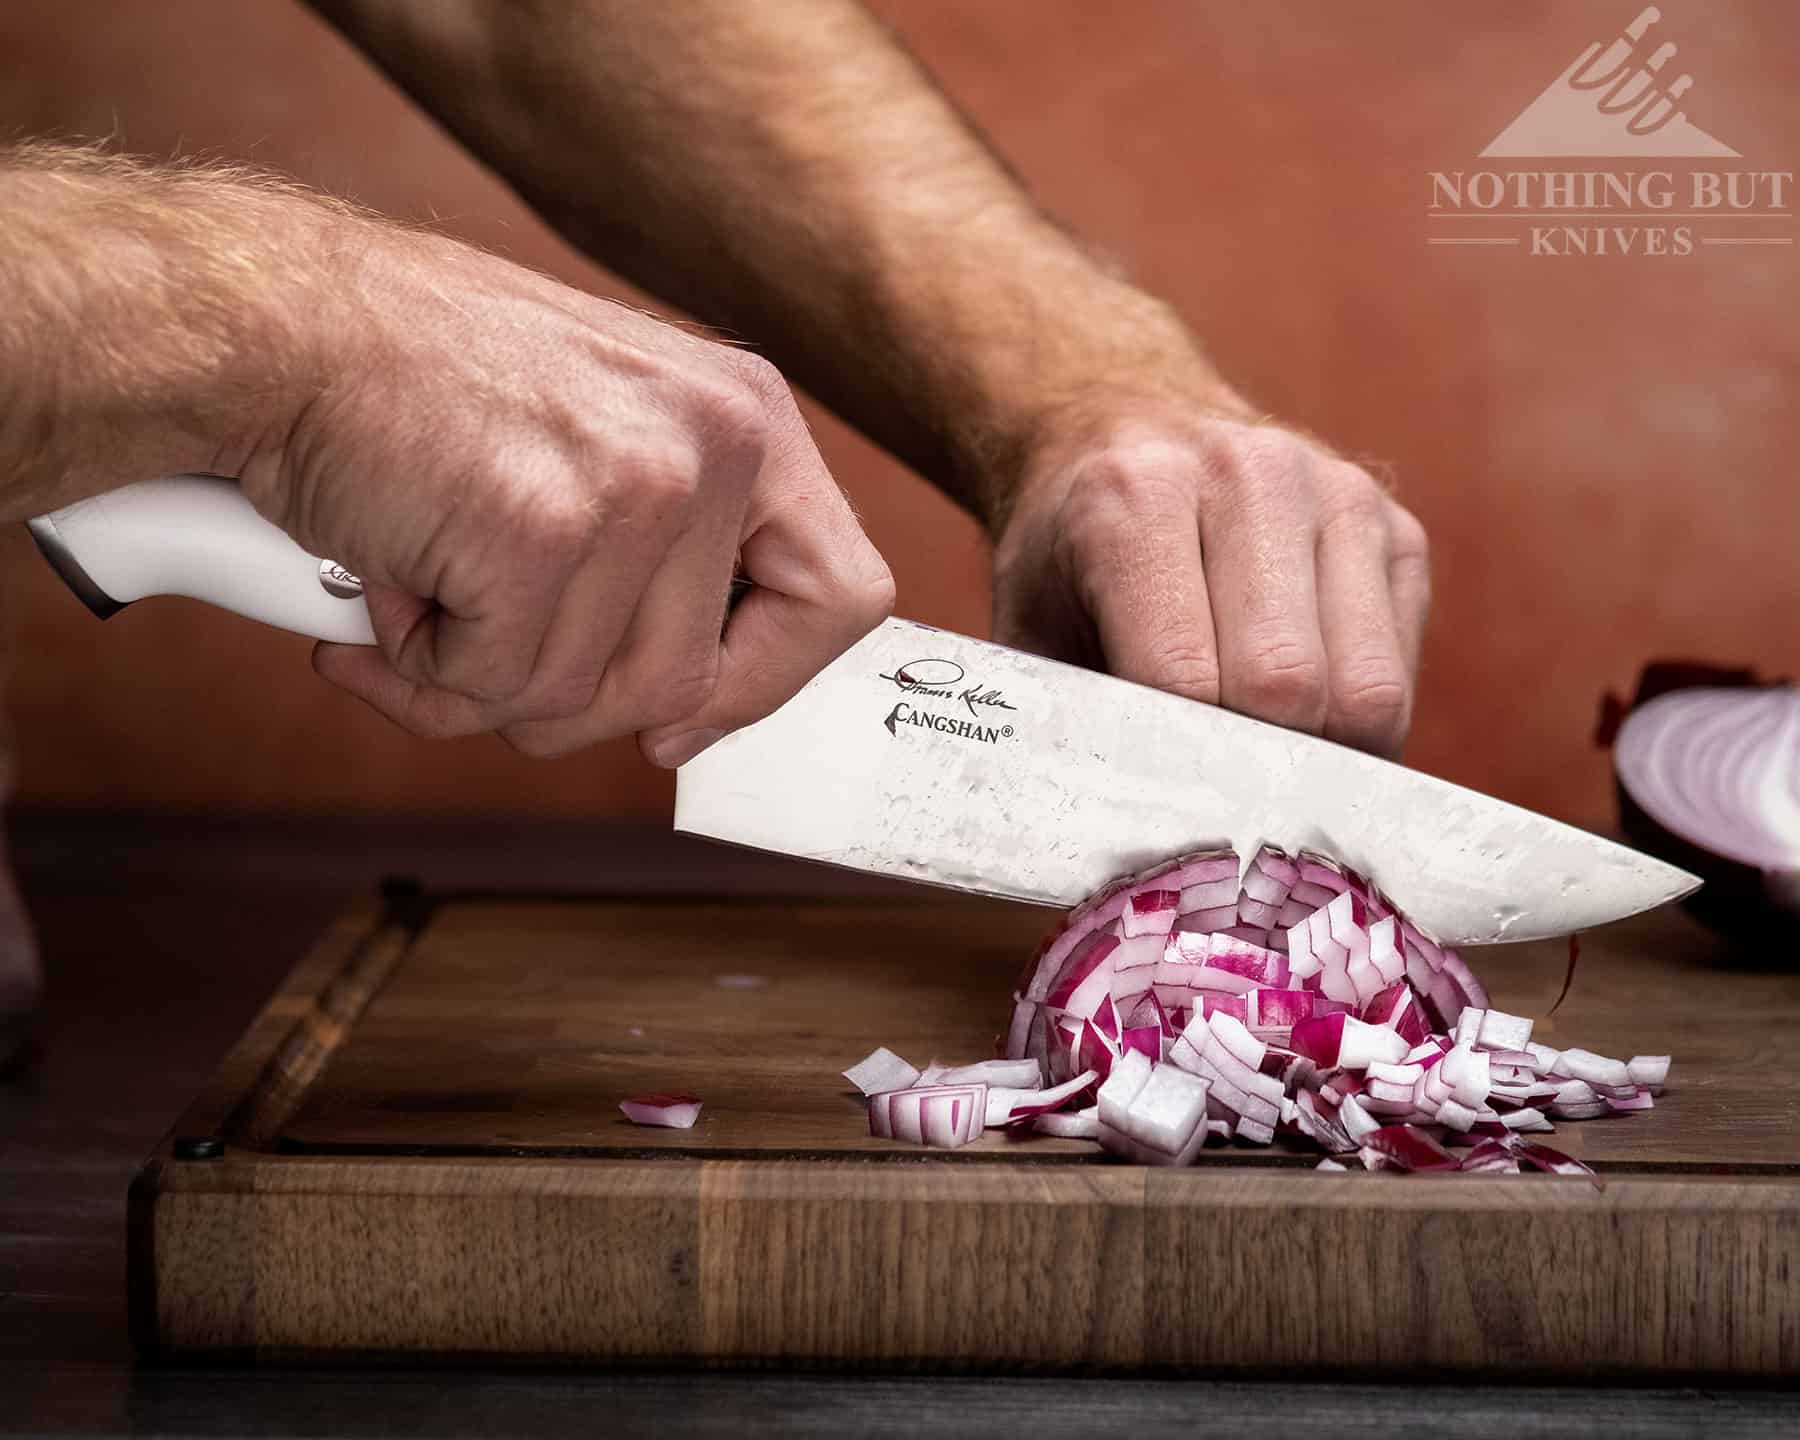 The Cangshan Thomas Keller Signature Collection chef knife cuts effortlessly though onions. 